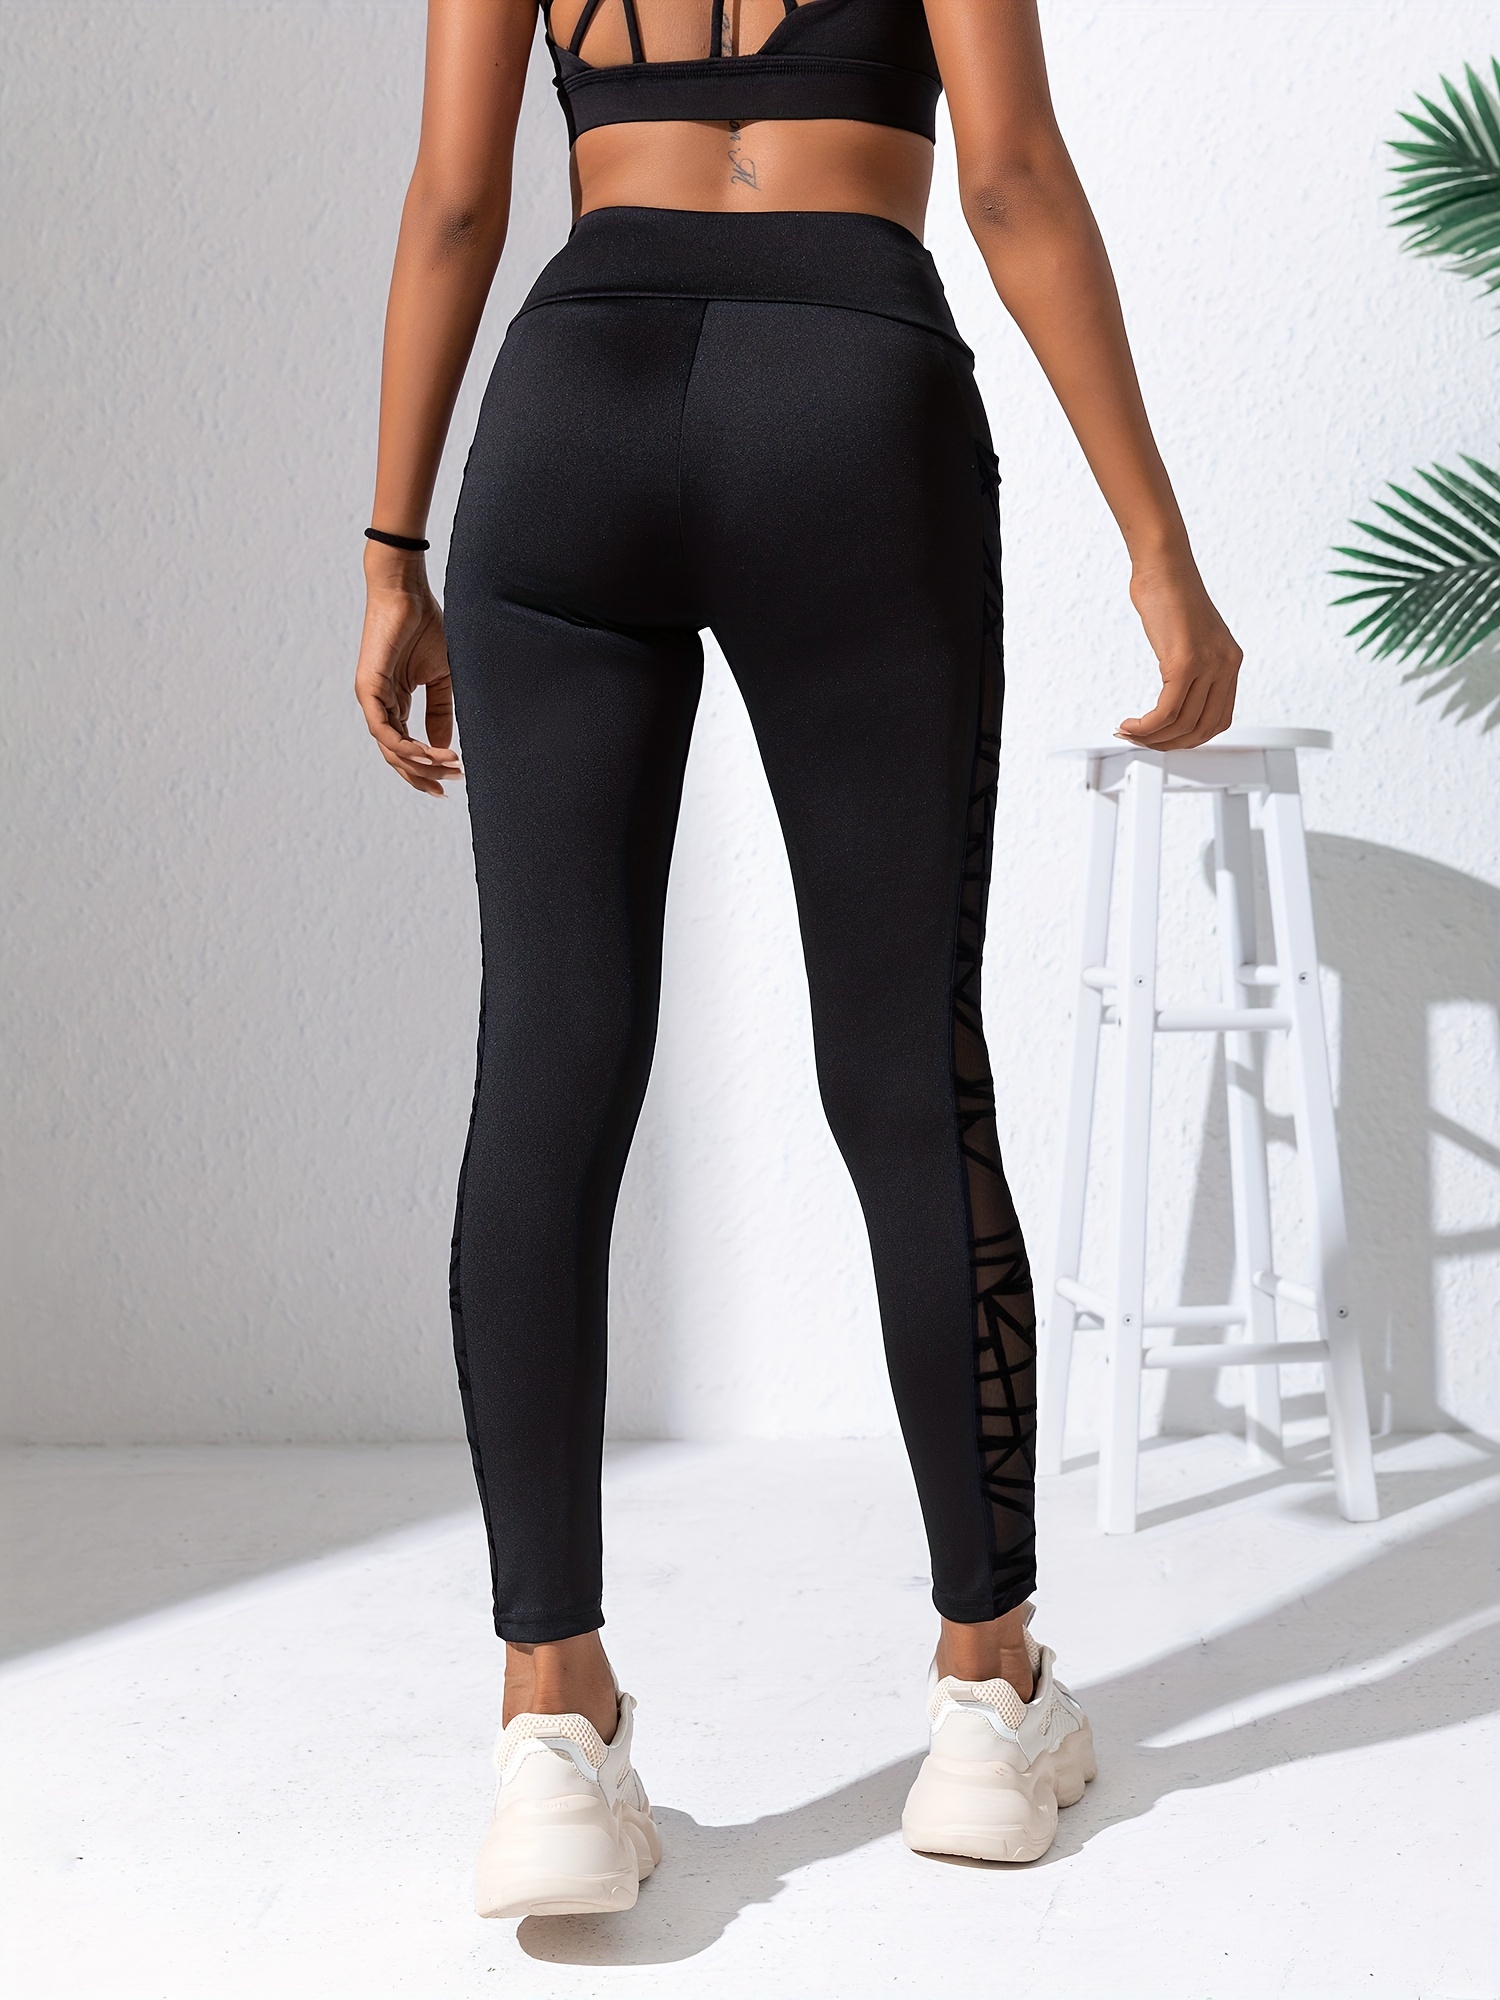 Womens Black Mesh Sports Leggings High Waist Fitness Yoga Pants With  Patchwork Design For Running & Gym From Lotus_love, $15.55